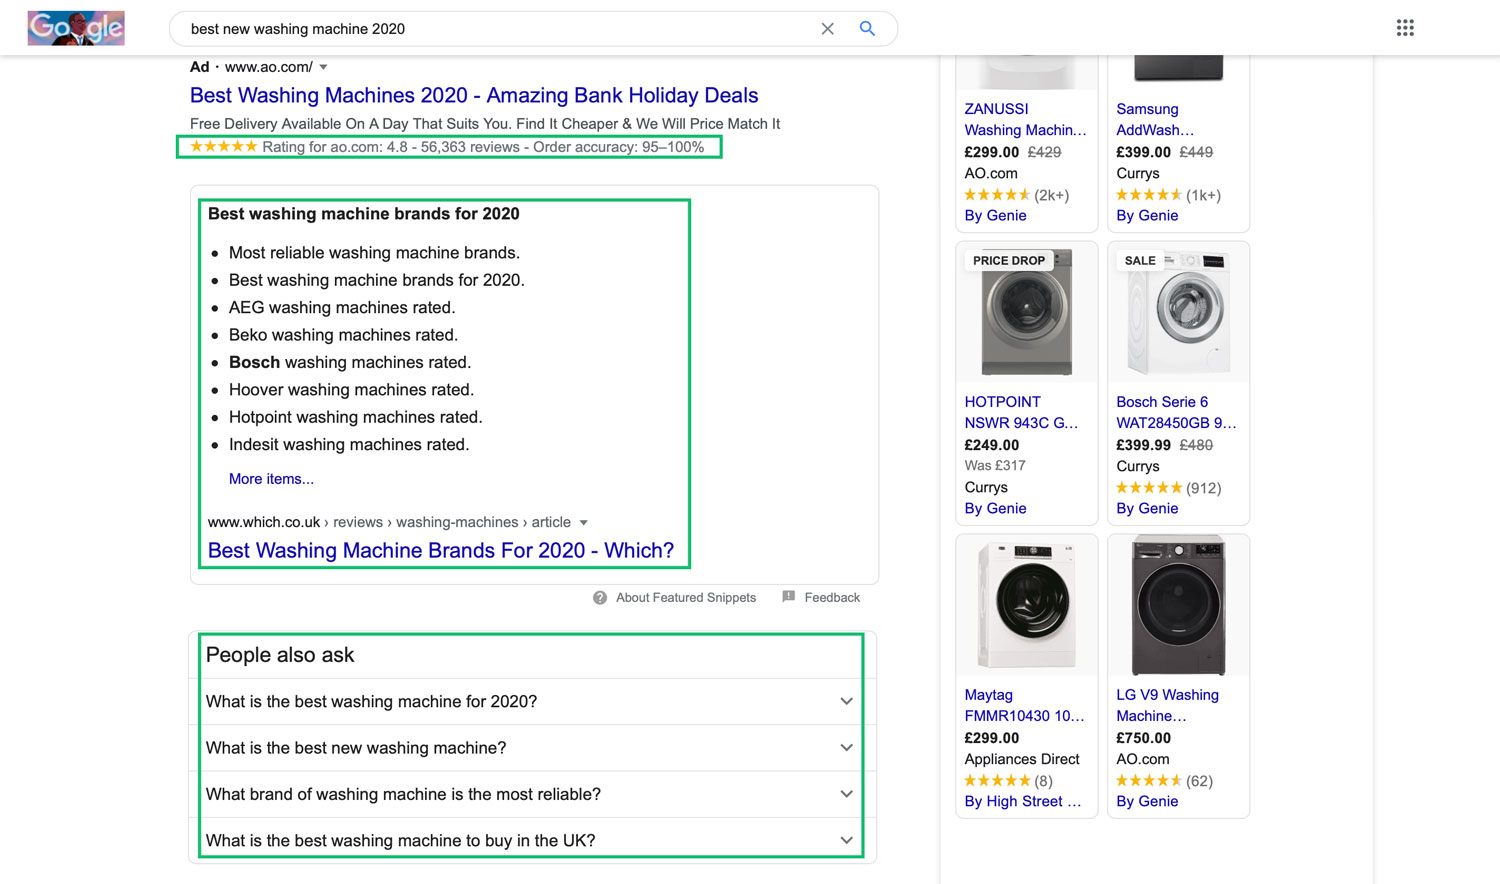 An image highlighting the various types of rich snippets that can be displayed in some Google searches